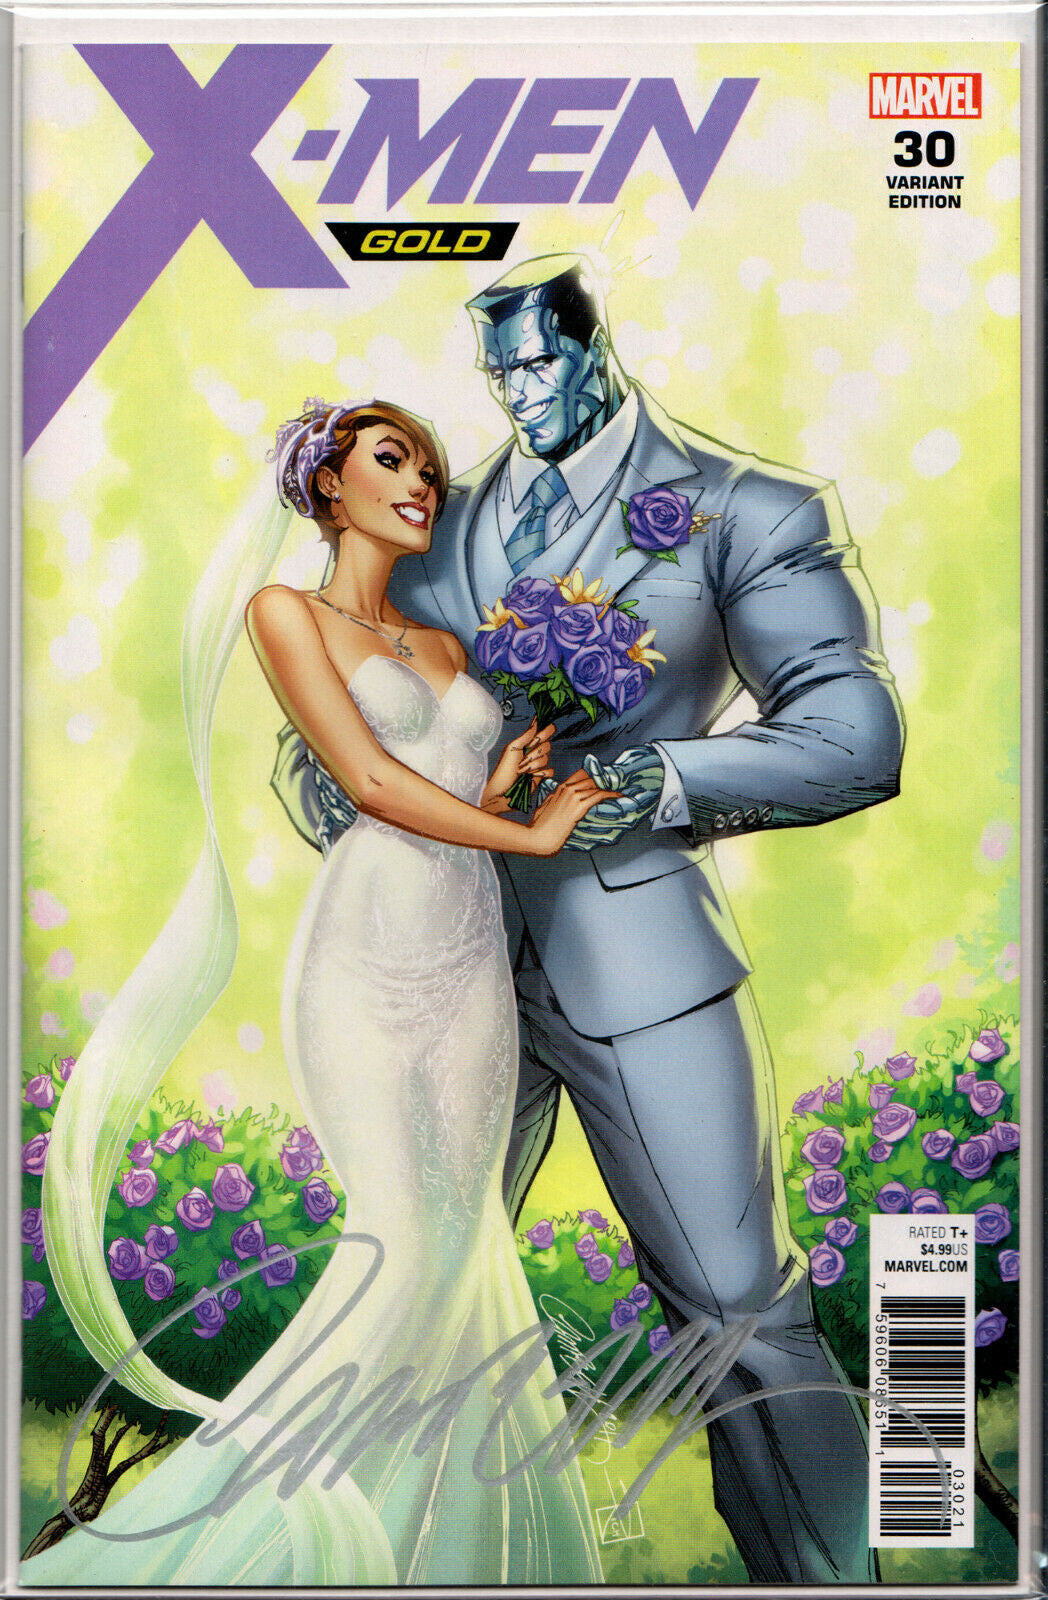 X-MEN: GOLD #30 SIGNED BY J. SCOTT CAMPBELL ~ Kitty/Colossus ~ Marvel Comics